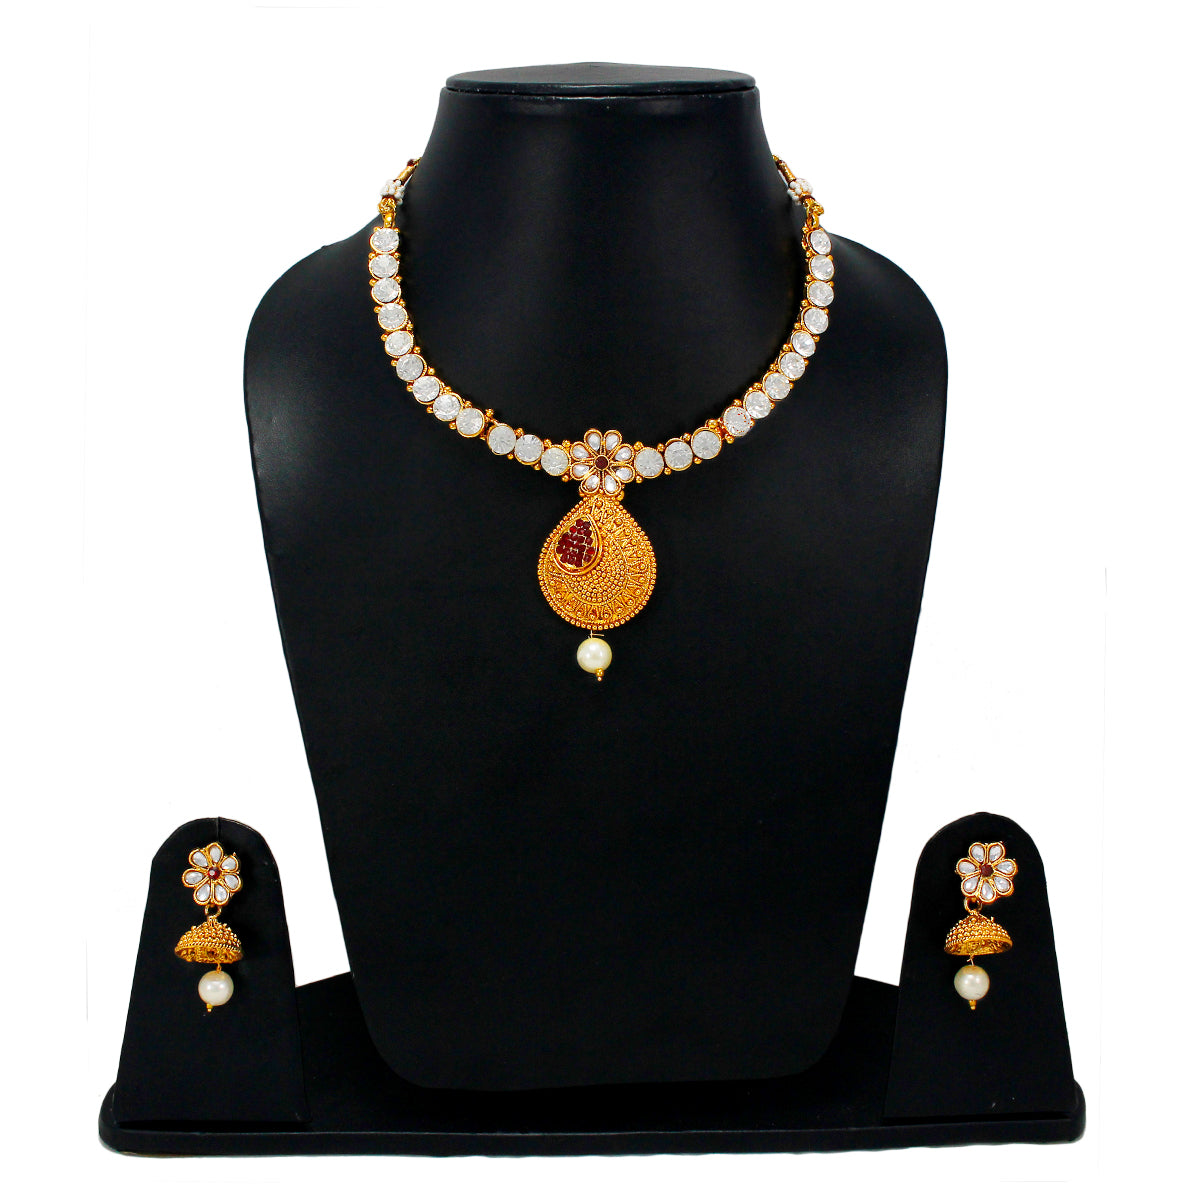 Abhinn Gold Plated Floral Rani Har Necklace Set With White And Red Kundan Stones For Women